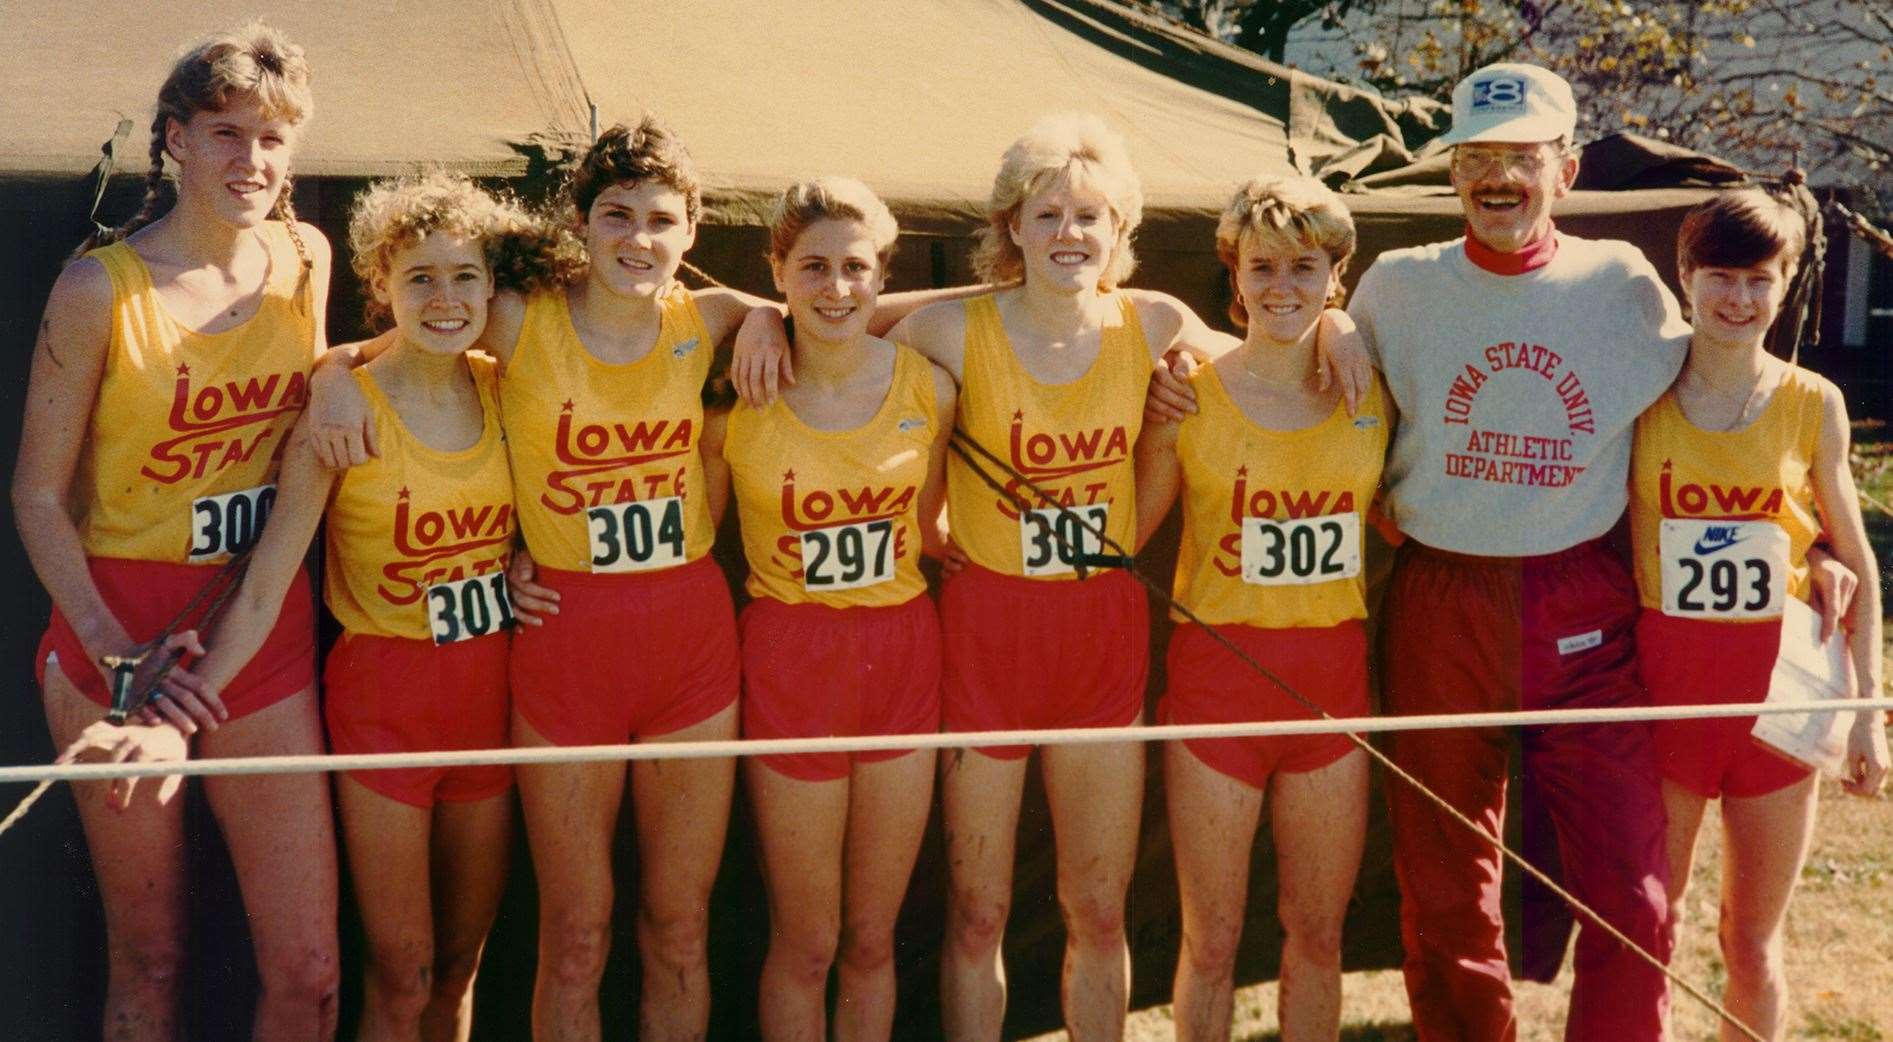 Charlene Letzring, Sheryl Maahs, Bonnie Sons, Tami Colby, Jill Slettedahl, Julie Rose, head coach Ron Renko and Sue Baxter. Picture: Iowa State University